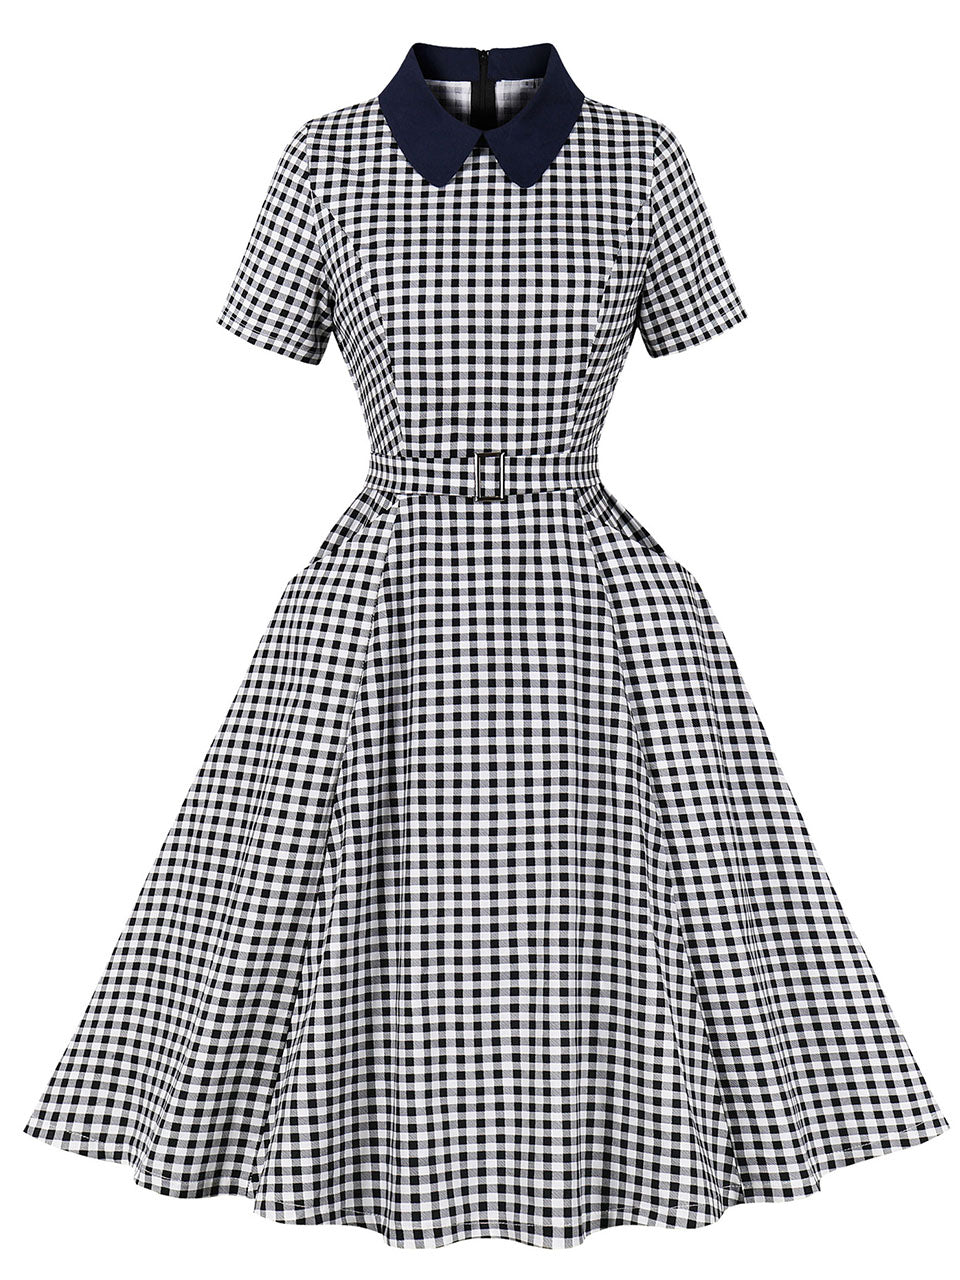 1950S Black Peter Pan Collar Plaid Short Sleeve Vintage Swing Dress With Pockets